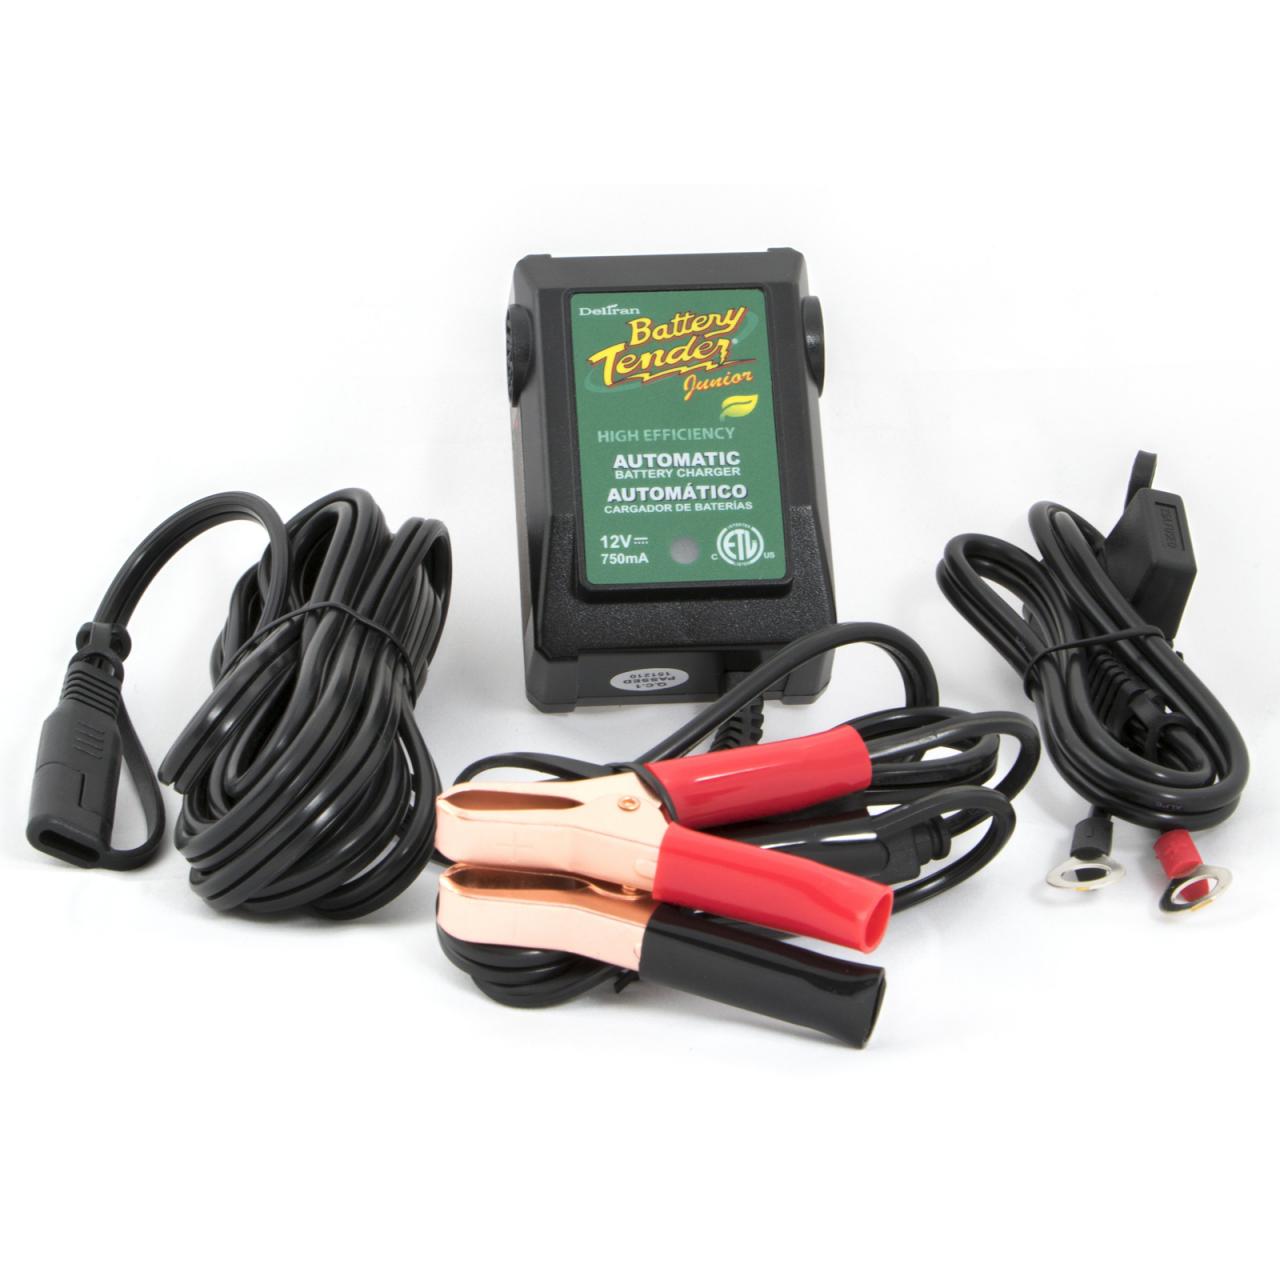 Buy Battery Tender 2-Bank Charger: 12V Battery Charger, 1.25 Amp with 2  Charging Banks - Smart 12V Battery Charger and Maintainer Station Charges  Up to 2 Power Sport Batteries at Once -